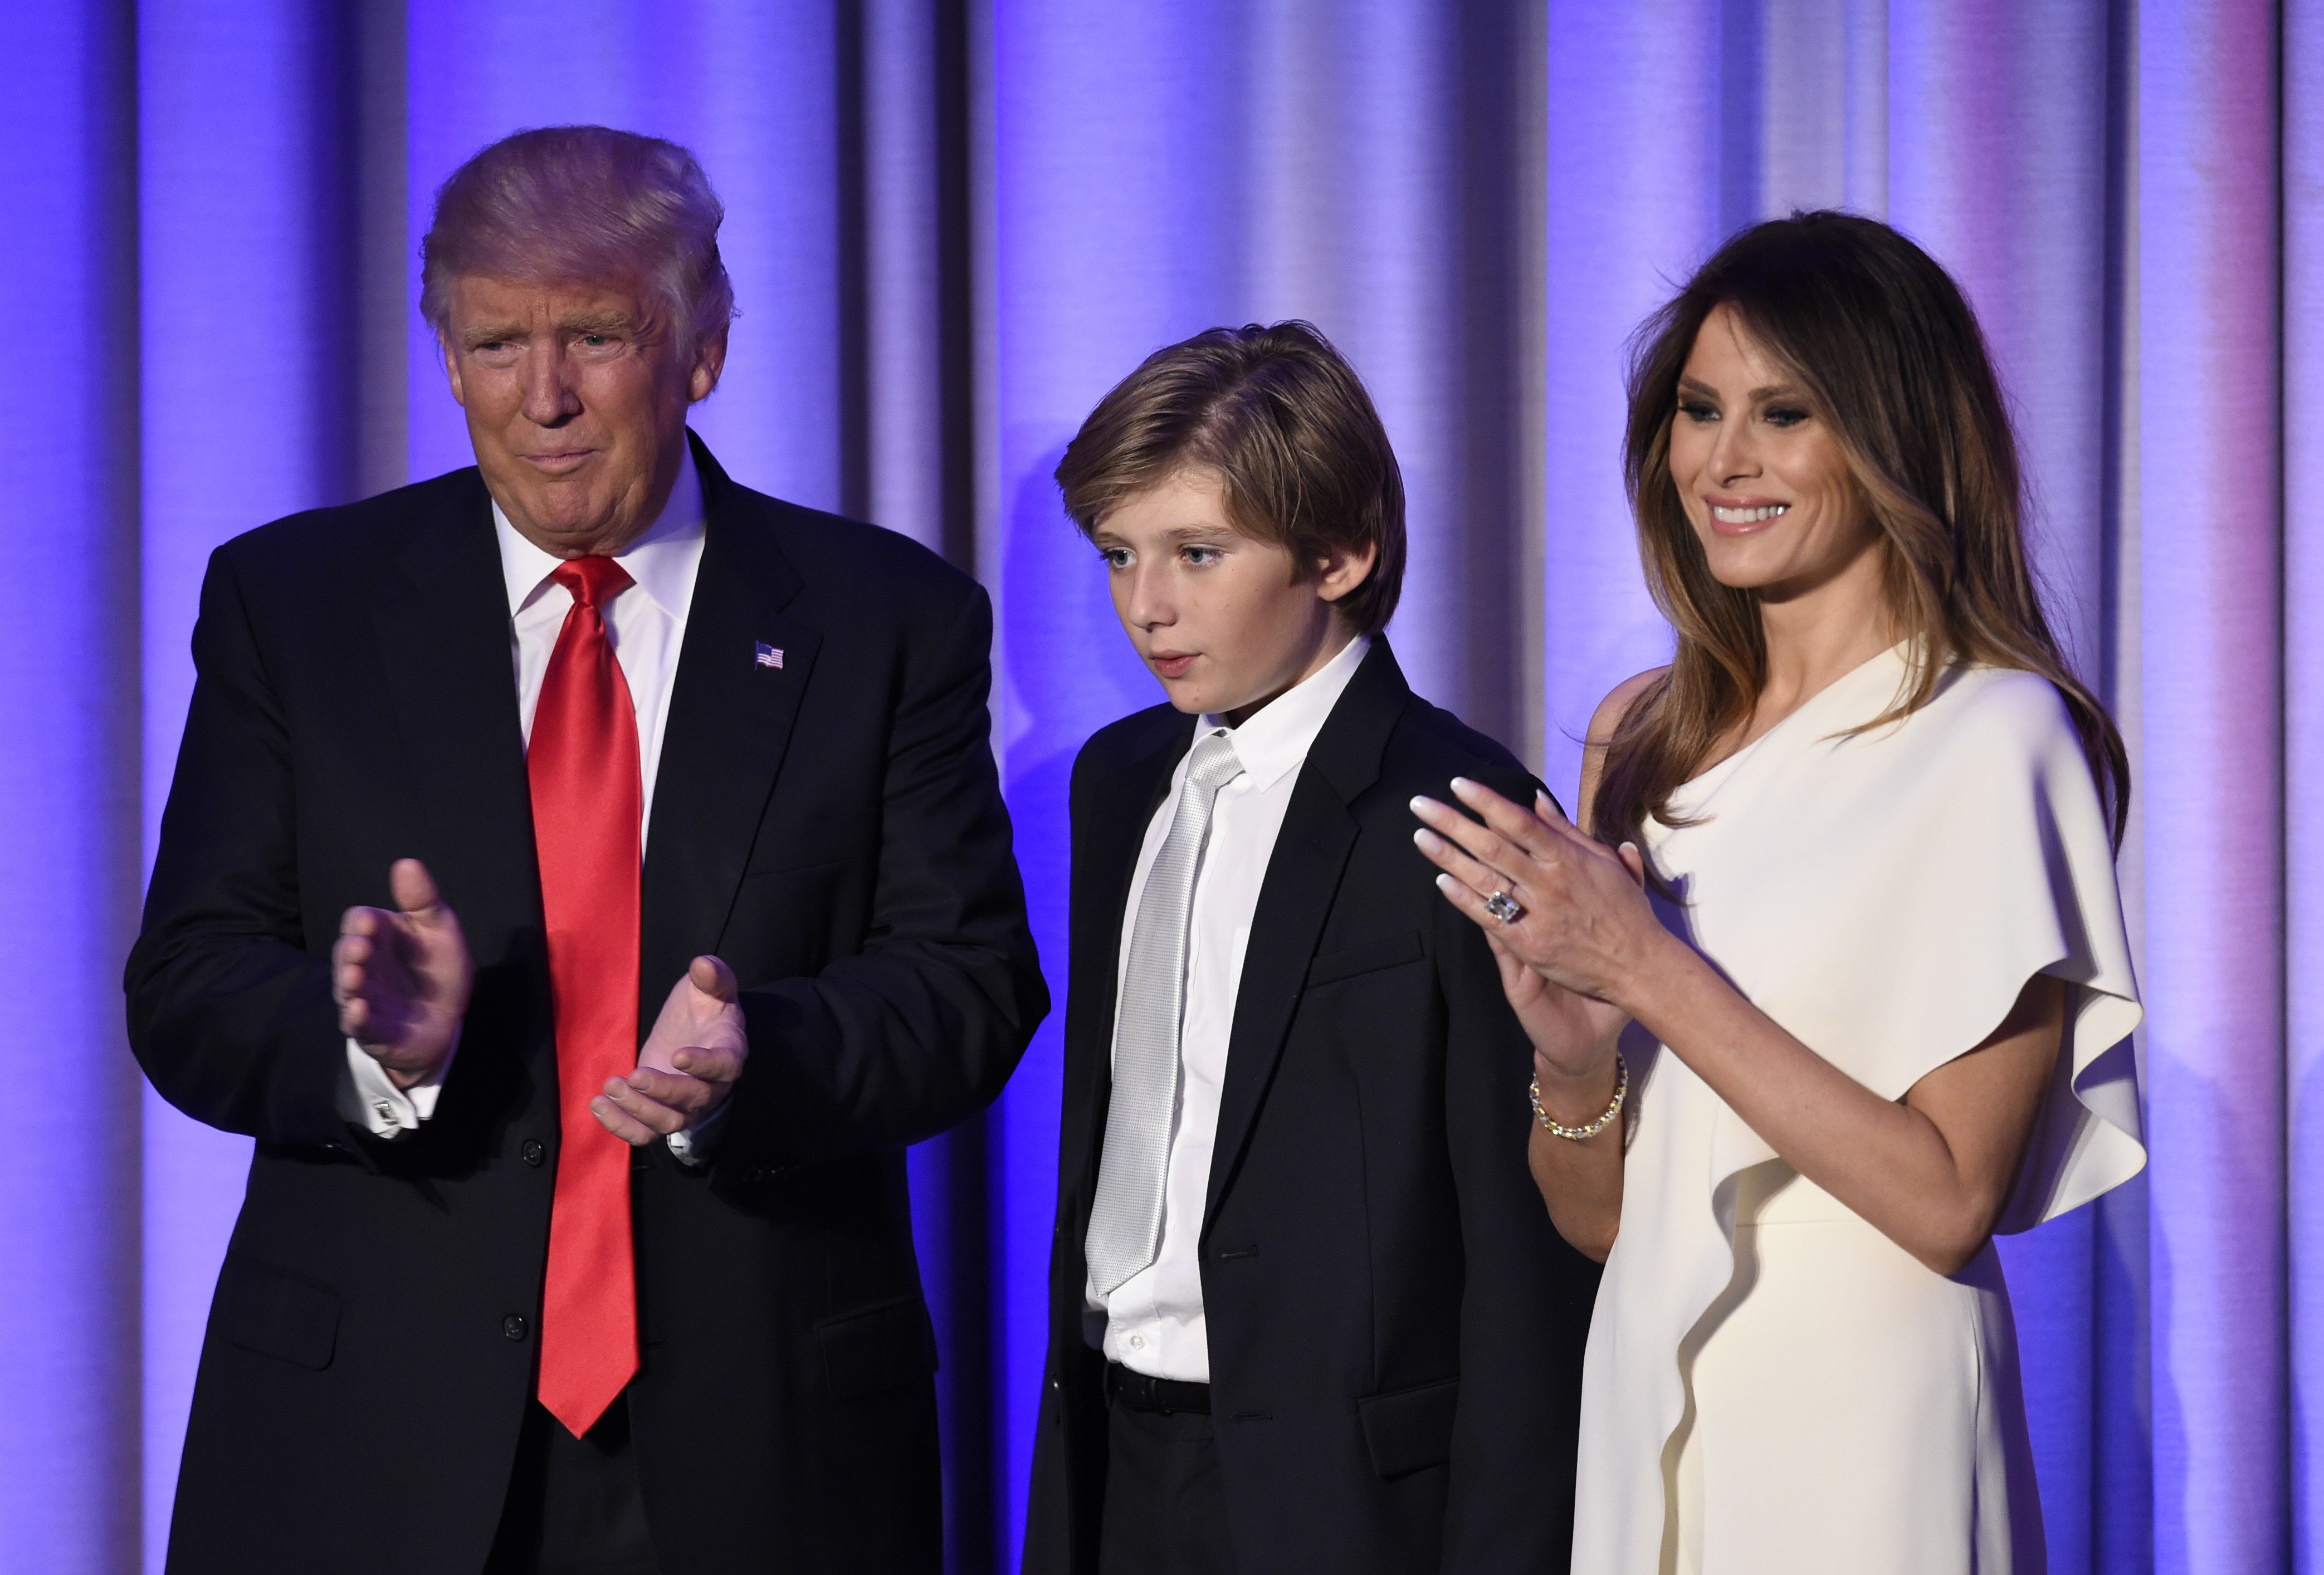 US President-elect Donald Trump arrives with his son Baron and wife Melania at the New York Hilton Midtown in New York on November 8, 2016. Trump stunned America and the world Wednesday, riding a wave of populist resentment to defeat Hillary Clinton in the race to become the 45th president of the United States. / AFP PHOTO / SAUL LOEB